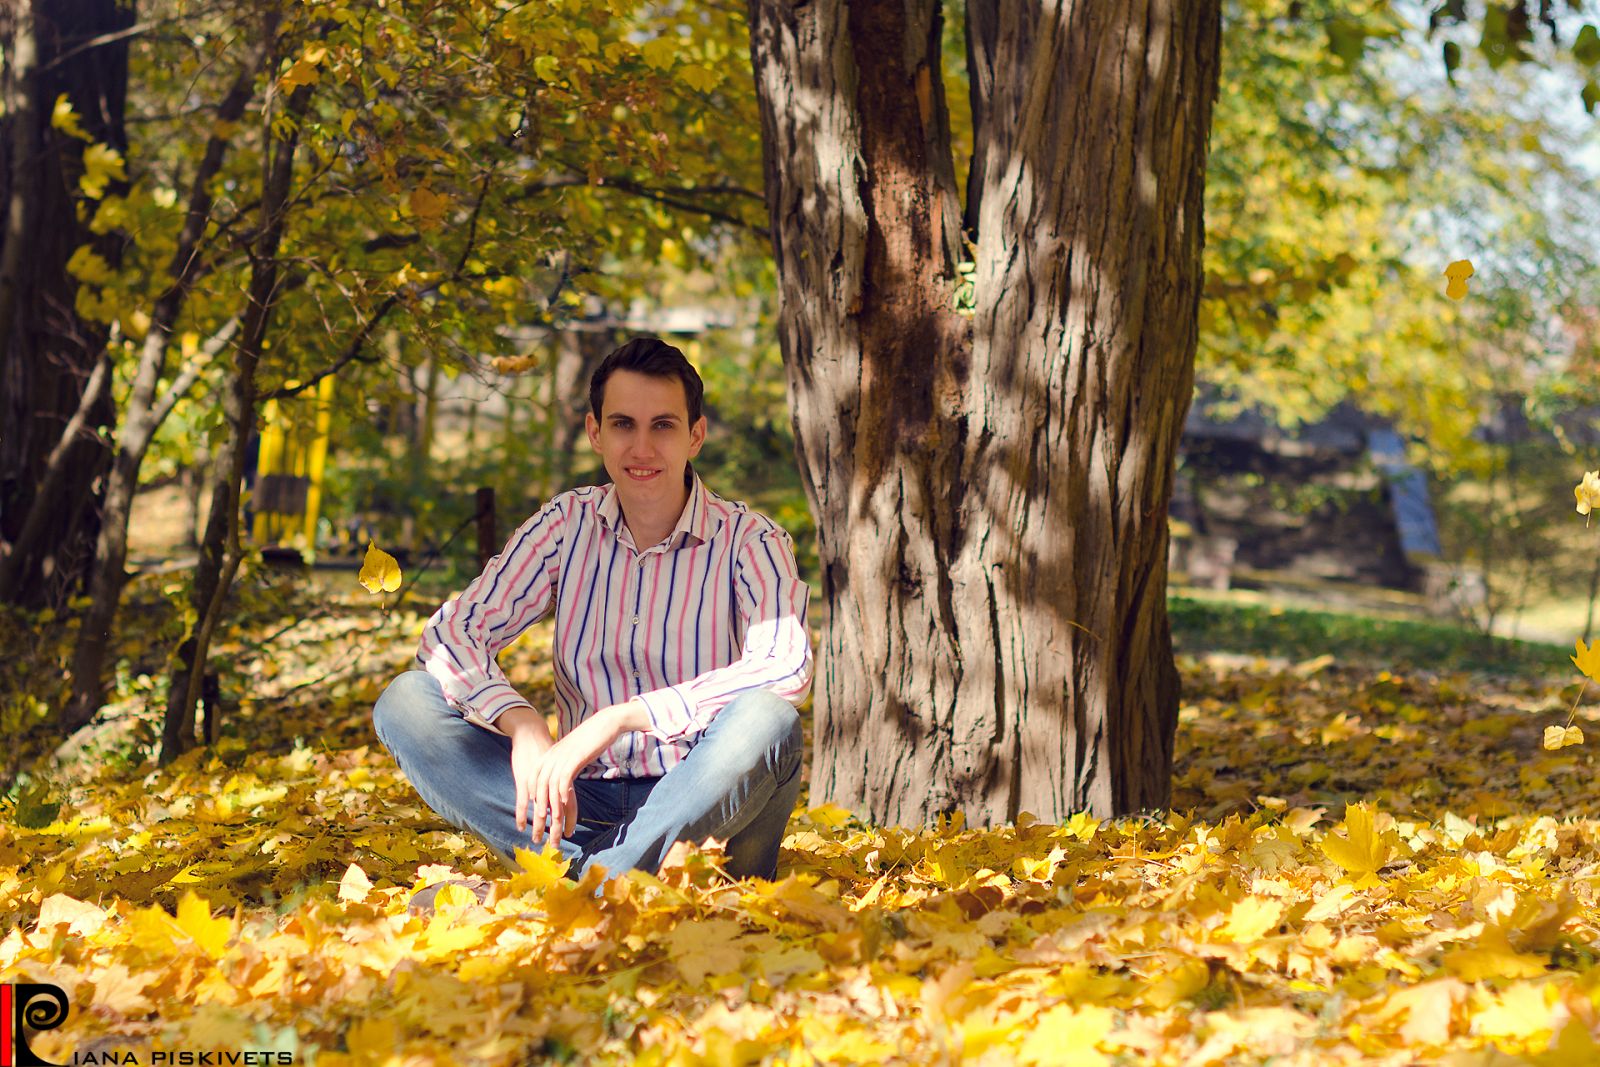 Interesting ideas for autumn photoshoot boys girls child autumn photo shoot photo shoot outdoors in the park Yellow leaves photosite pose idea lessons article on website photos professional photographer abroad photoset pictures photos leaf autumn leaves in the park